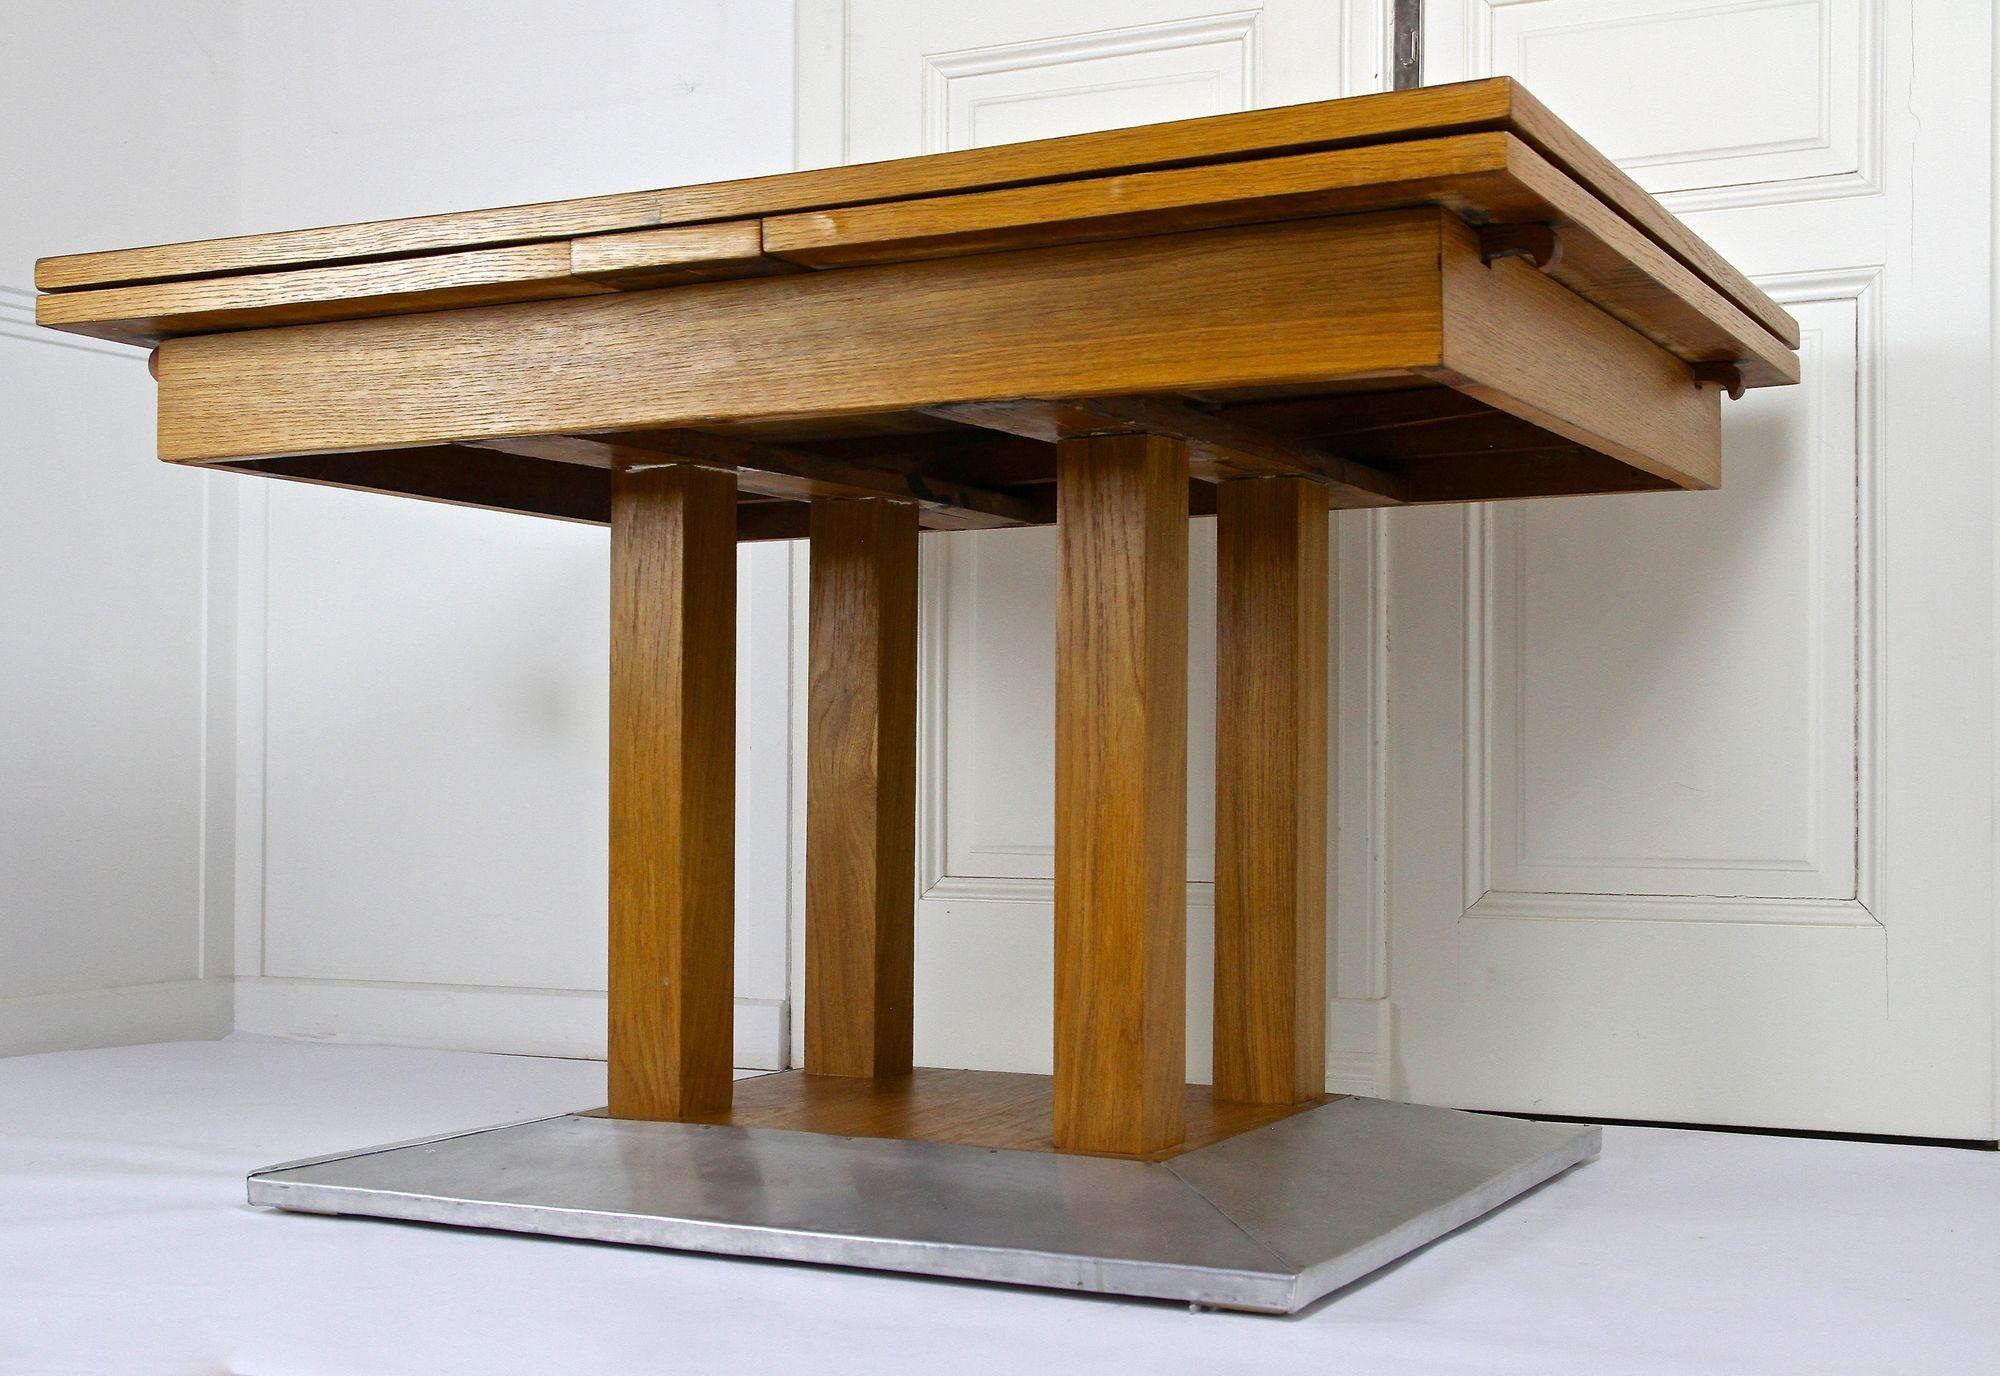 20th Century Extendable Oakwood Dining Table by Josef Hoffmann, AT ca. 1905 For Sale 8